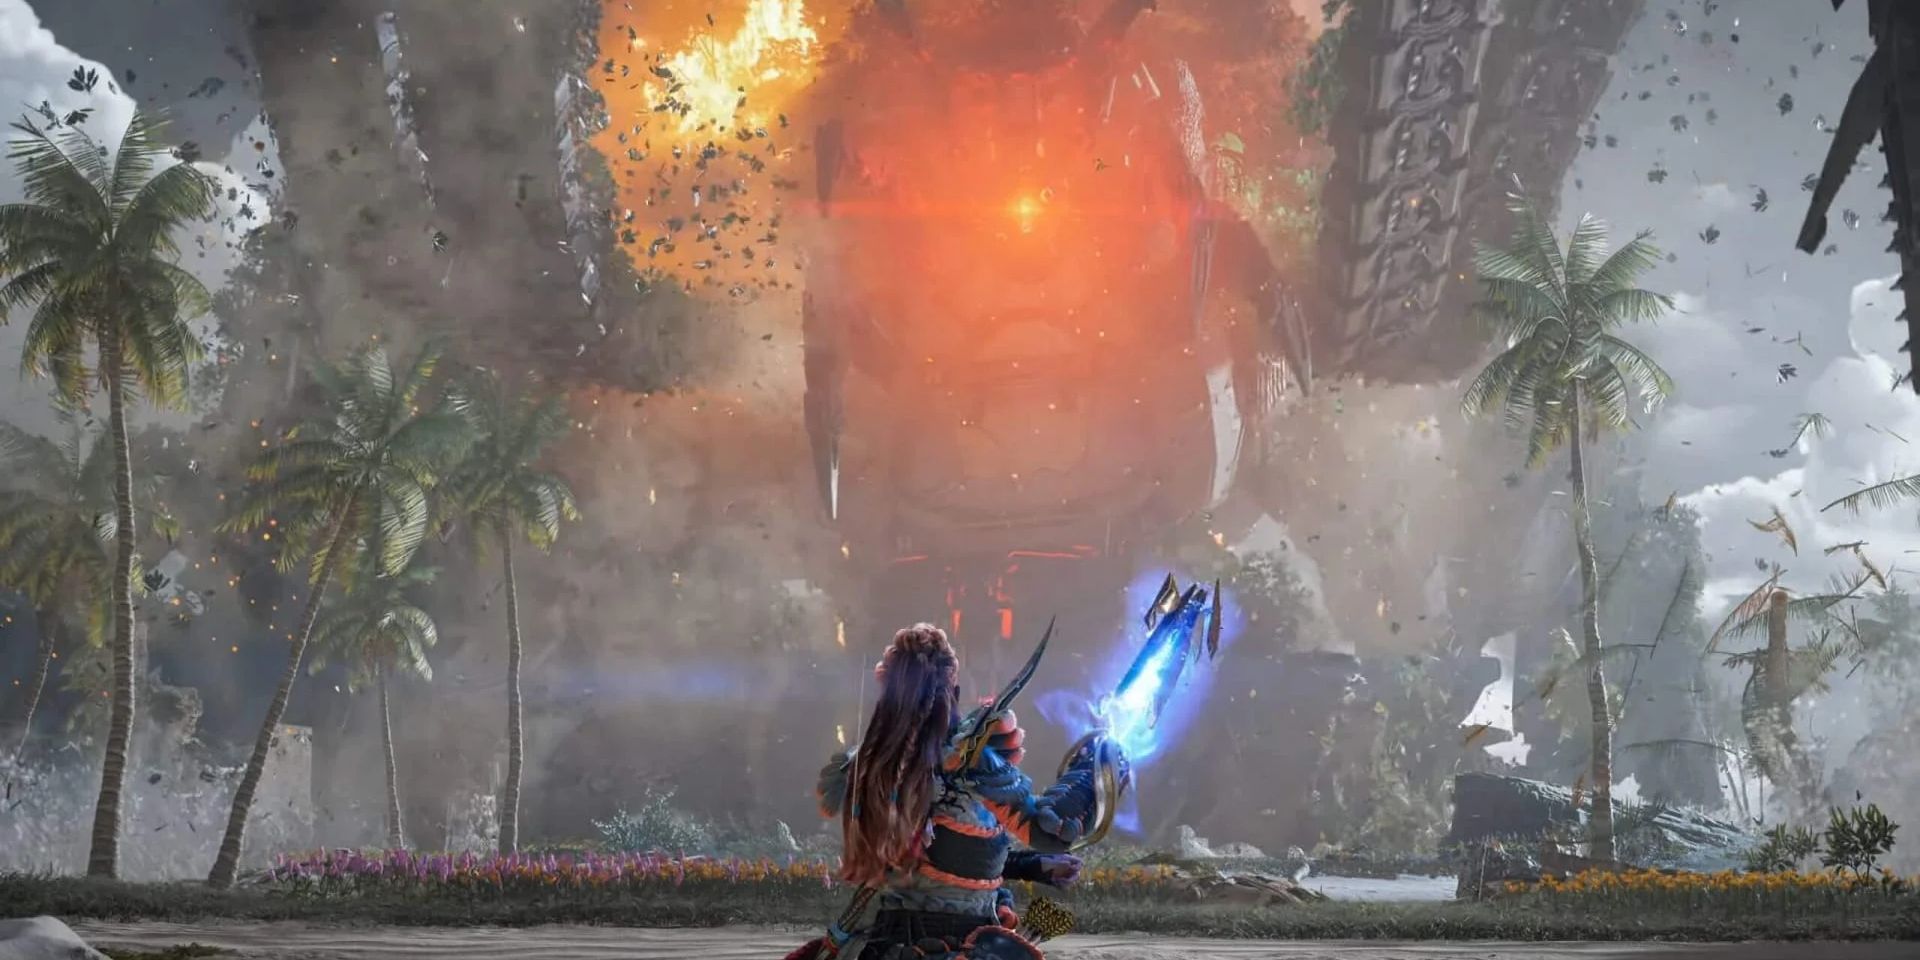 Aloy faces a giant machine in the Horizon Forbidden West Burning Shores DLC.